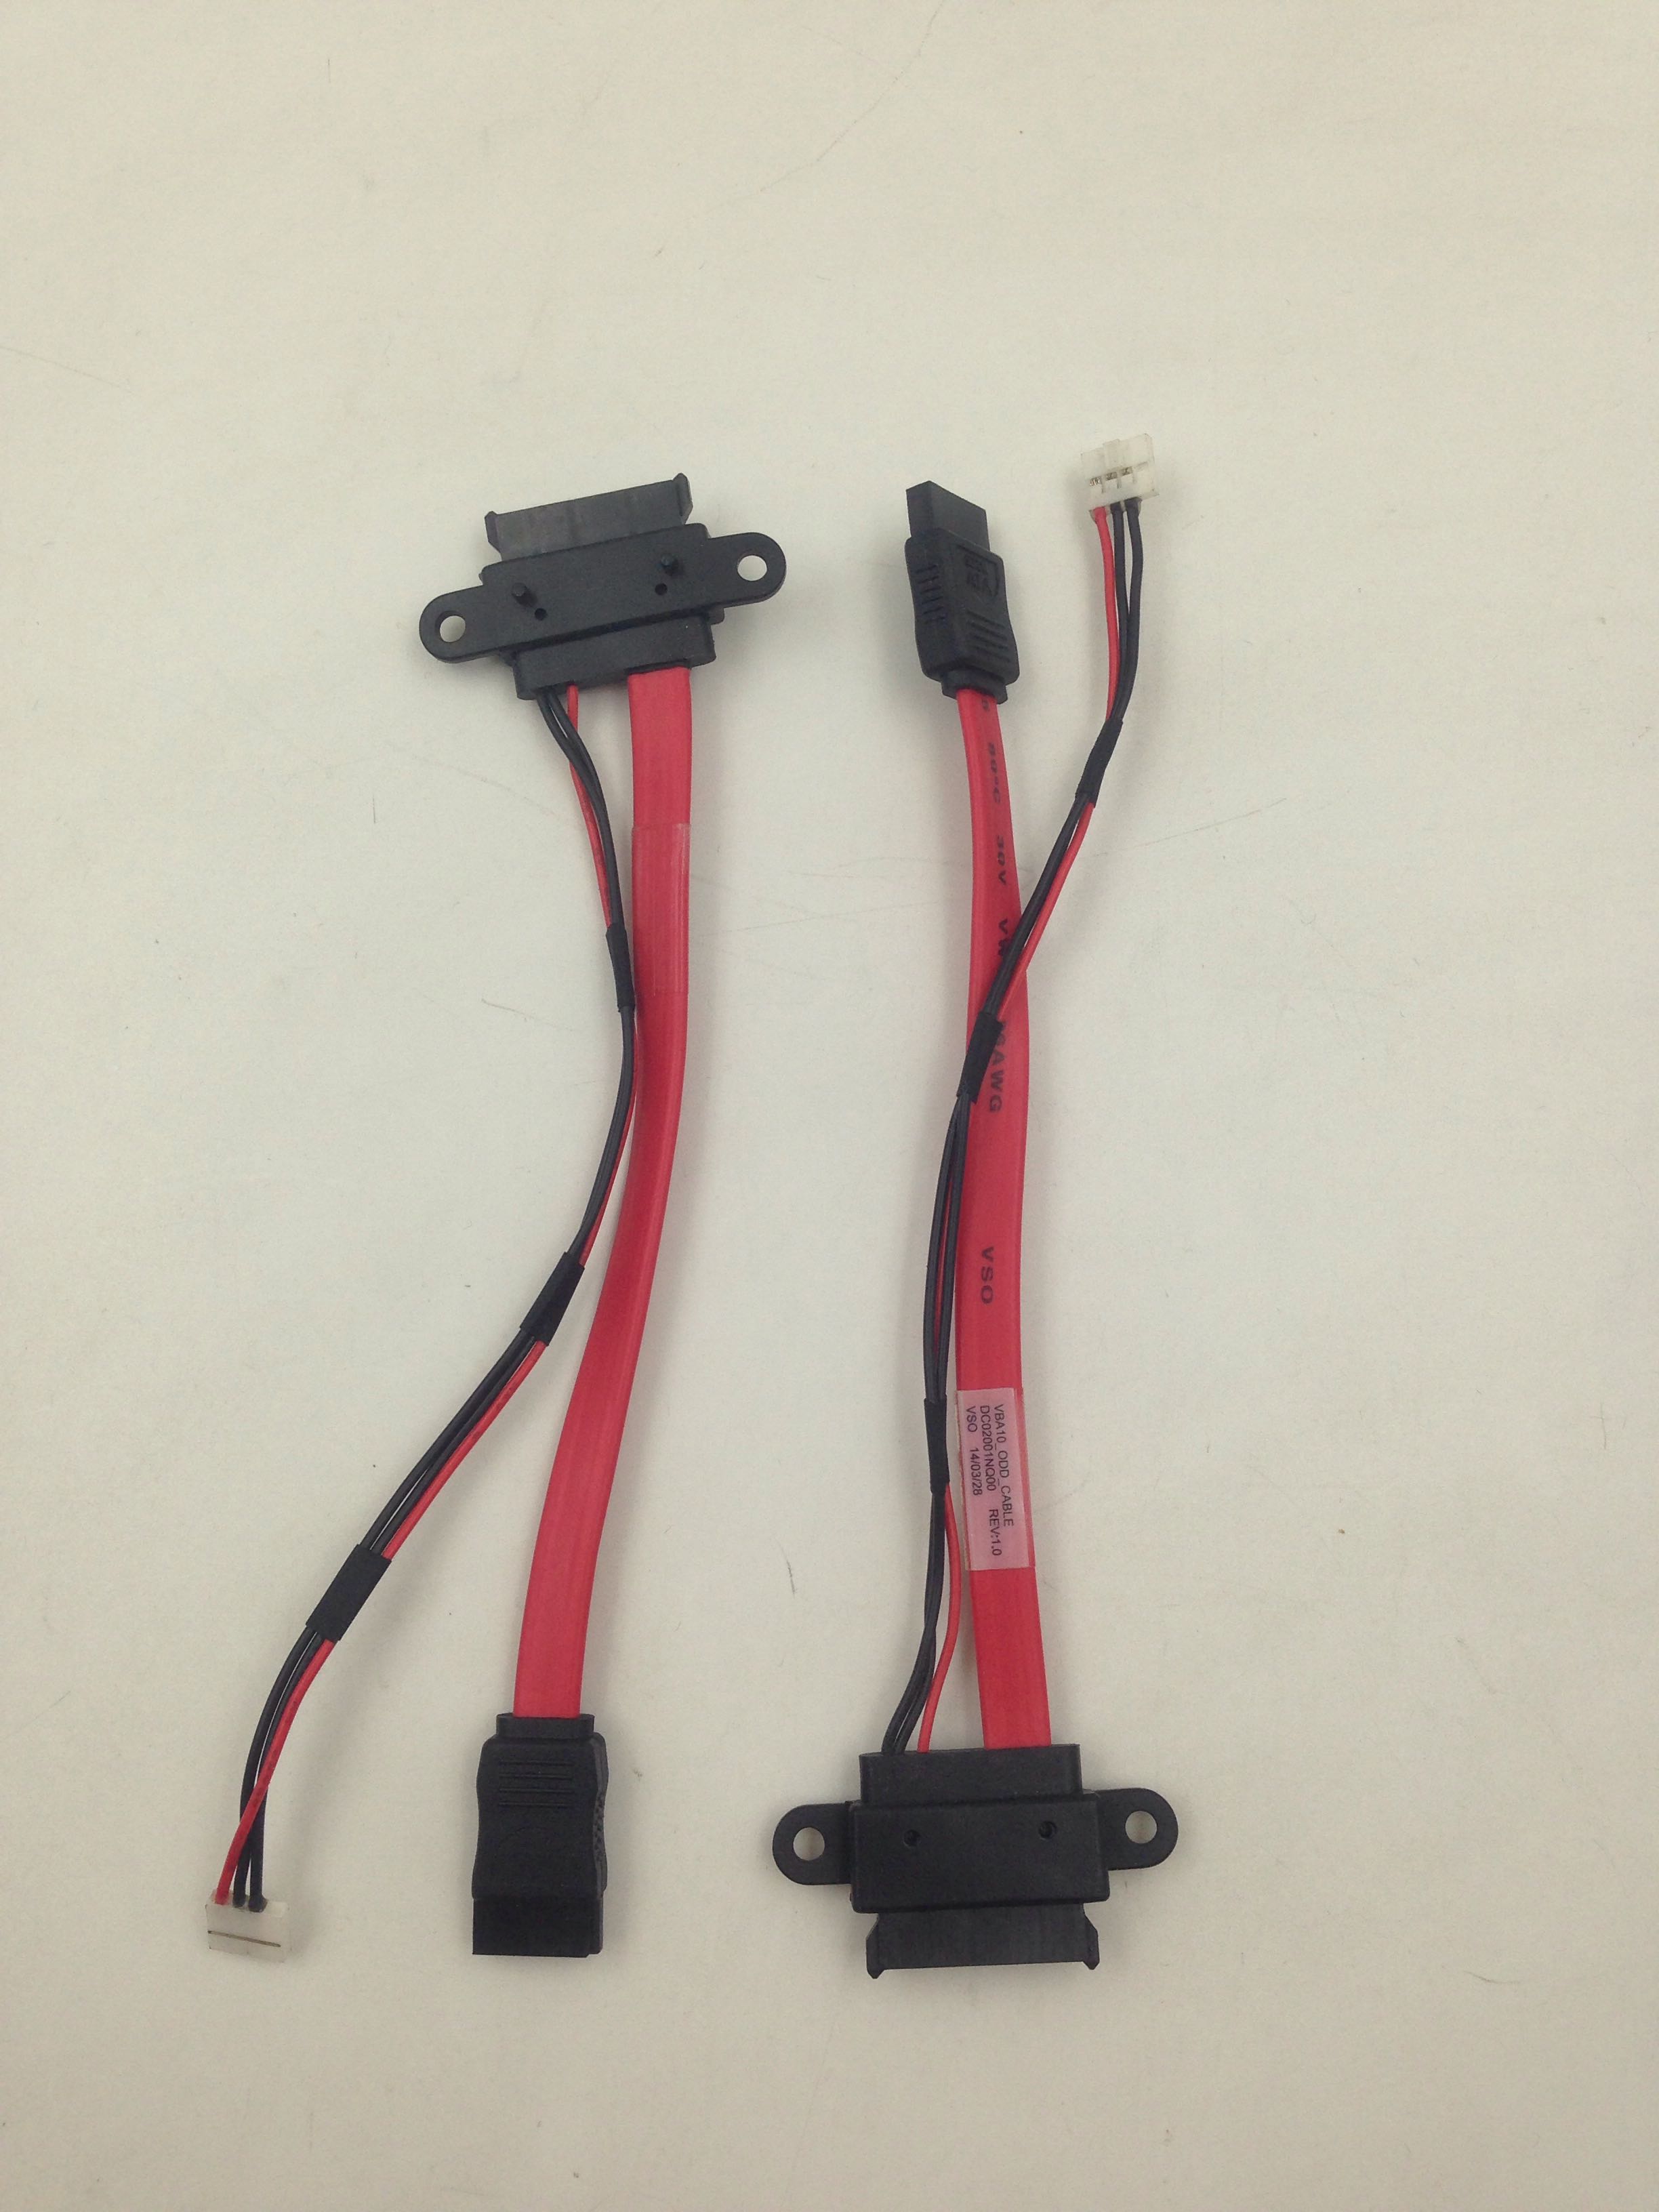 New Lenovo C240 C245 VBA10_HDD_CABLE DC02001NQ00 All in One Destop PC SATA Power CD/DVD ODD Optical Cable Connector